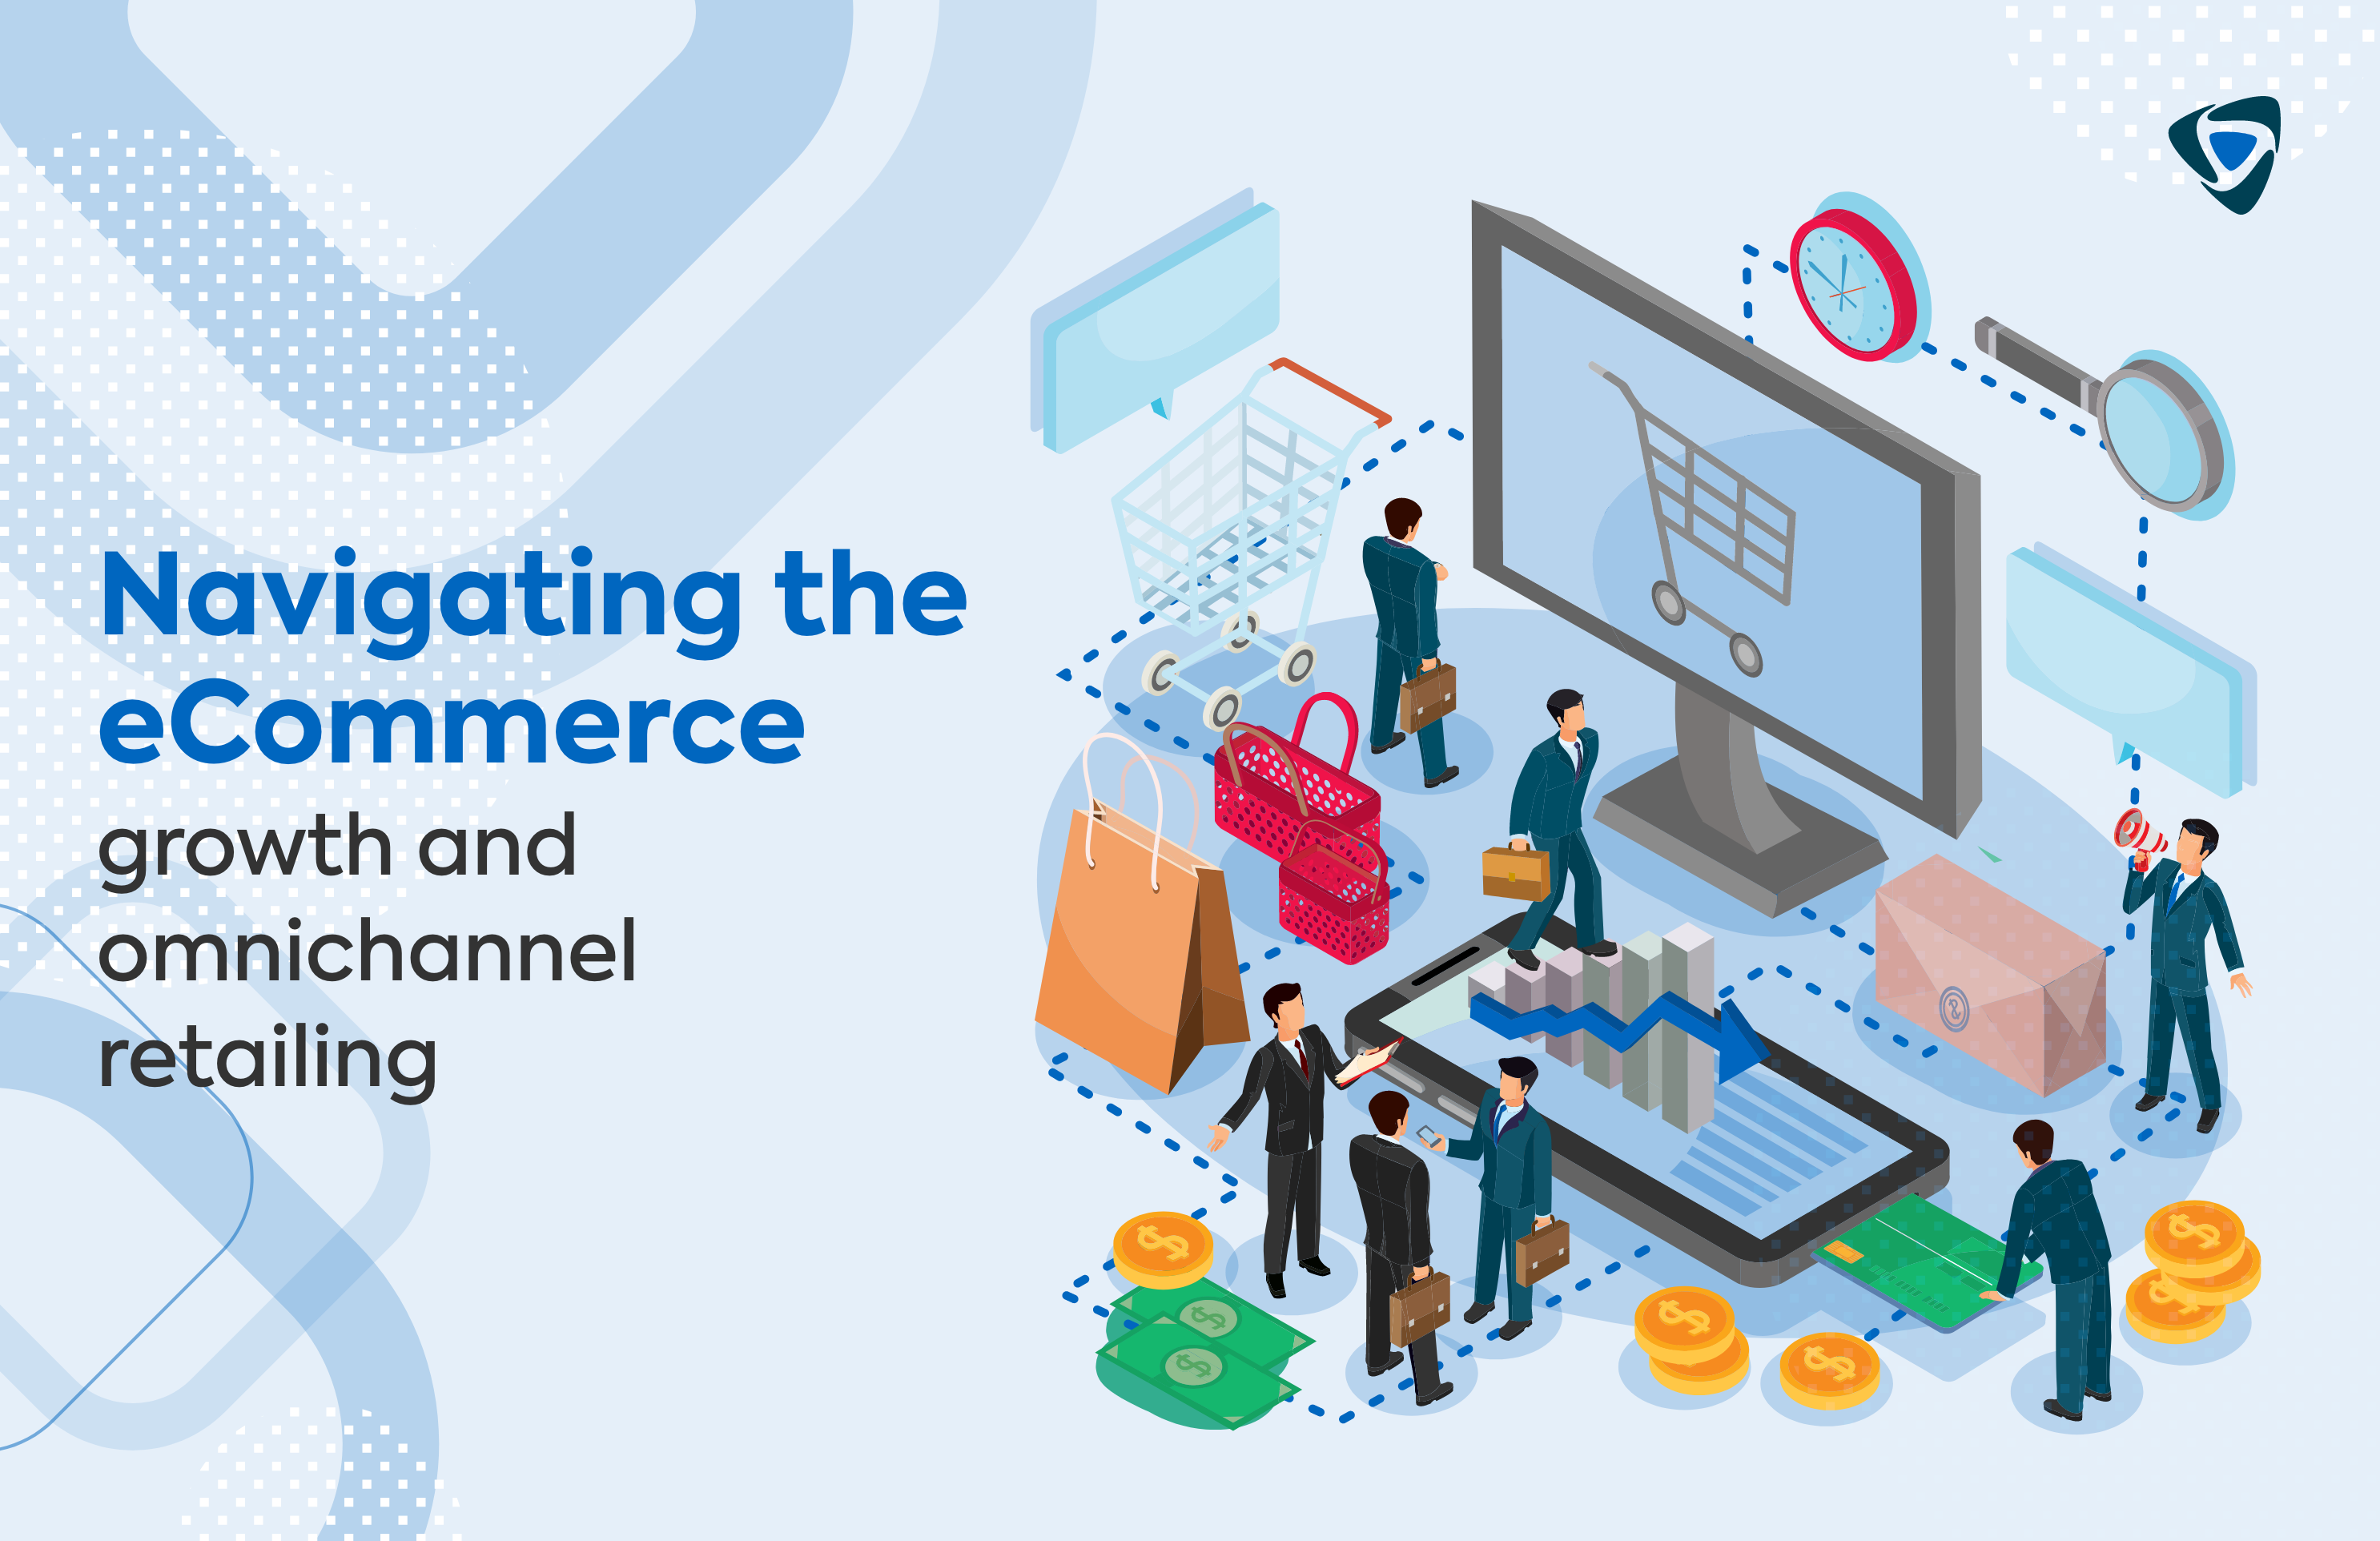 Navigating the eCommerce growth and omnichannel retailing